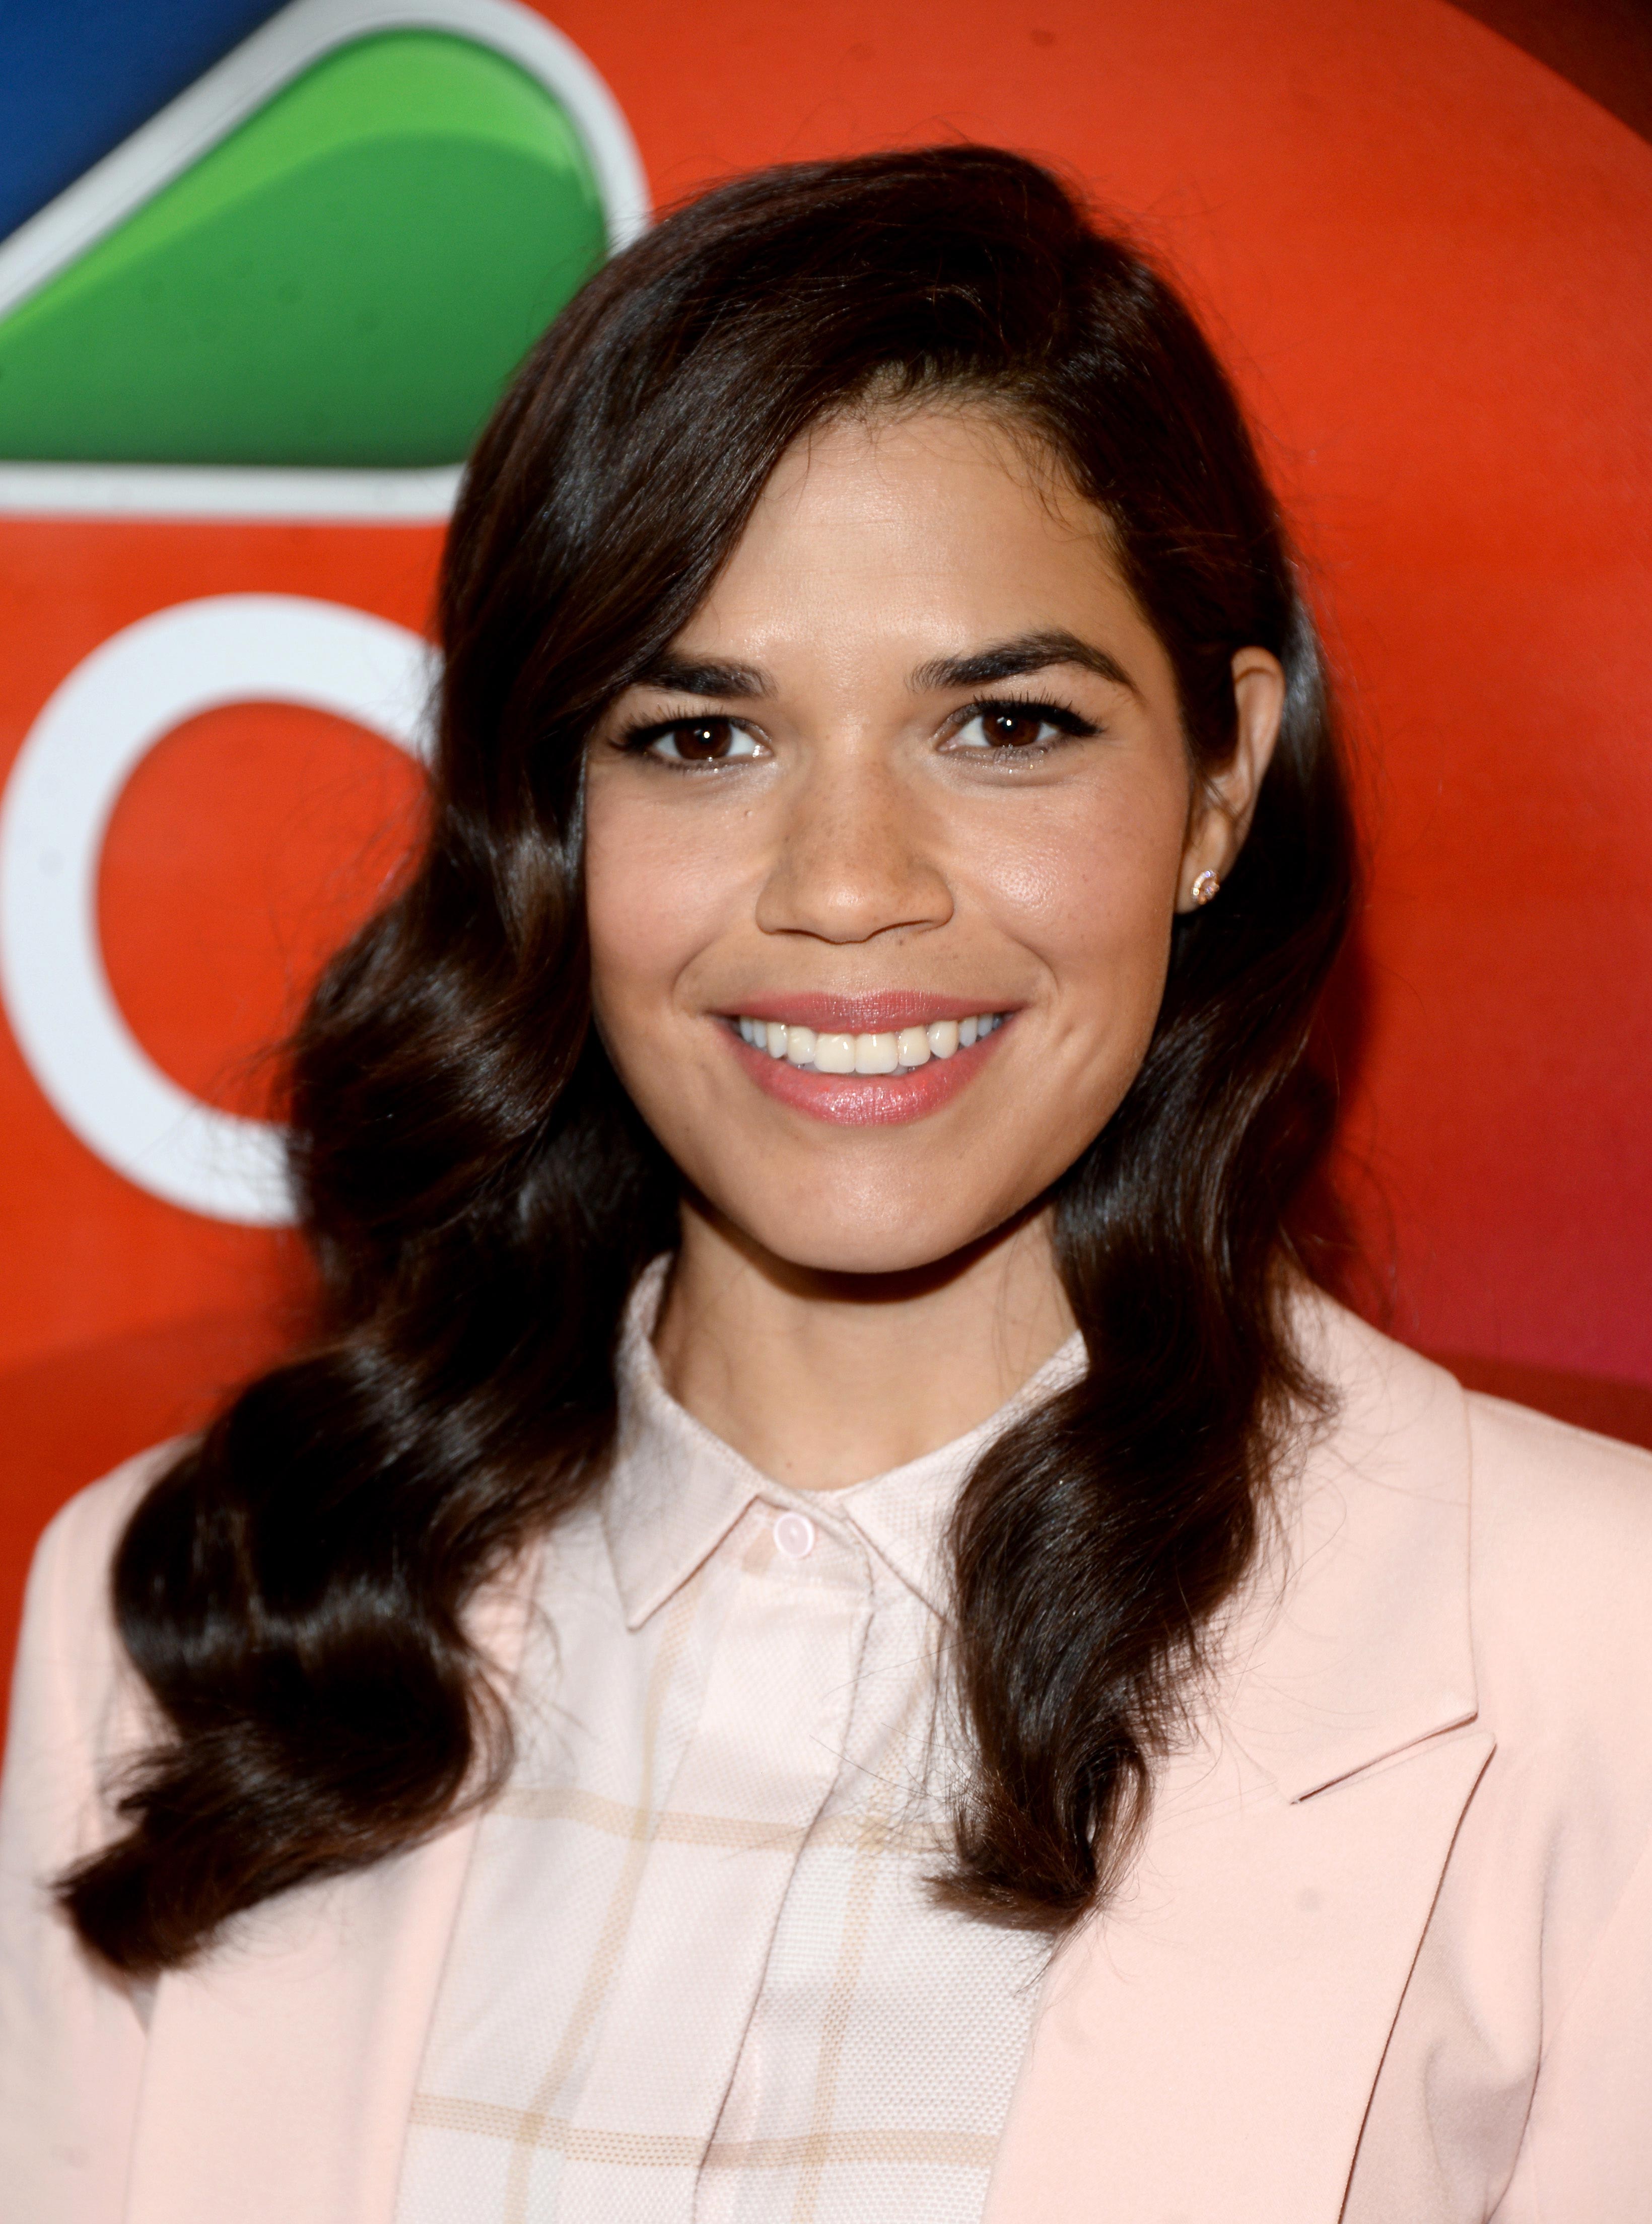 Real Women Have Curves: America Ferrera Interview